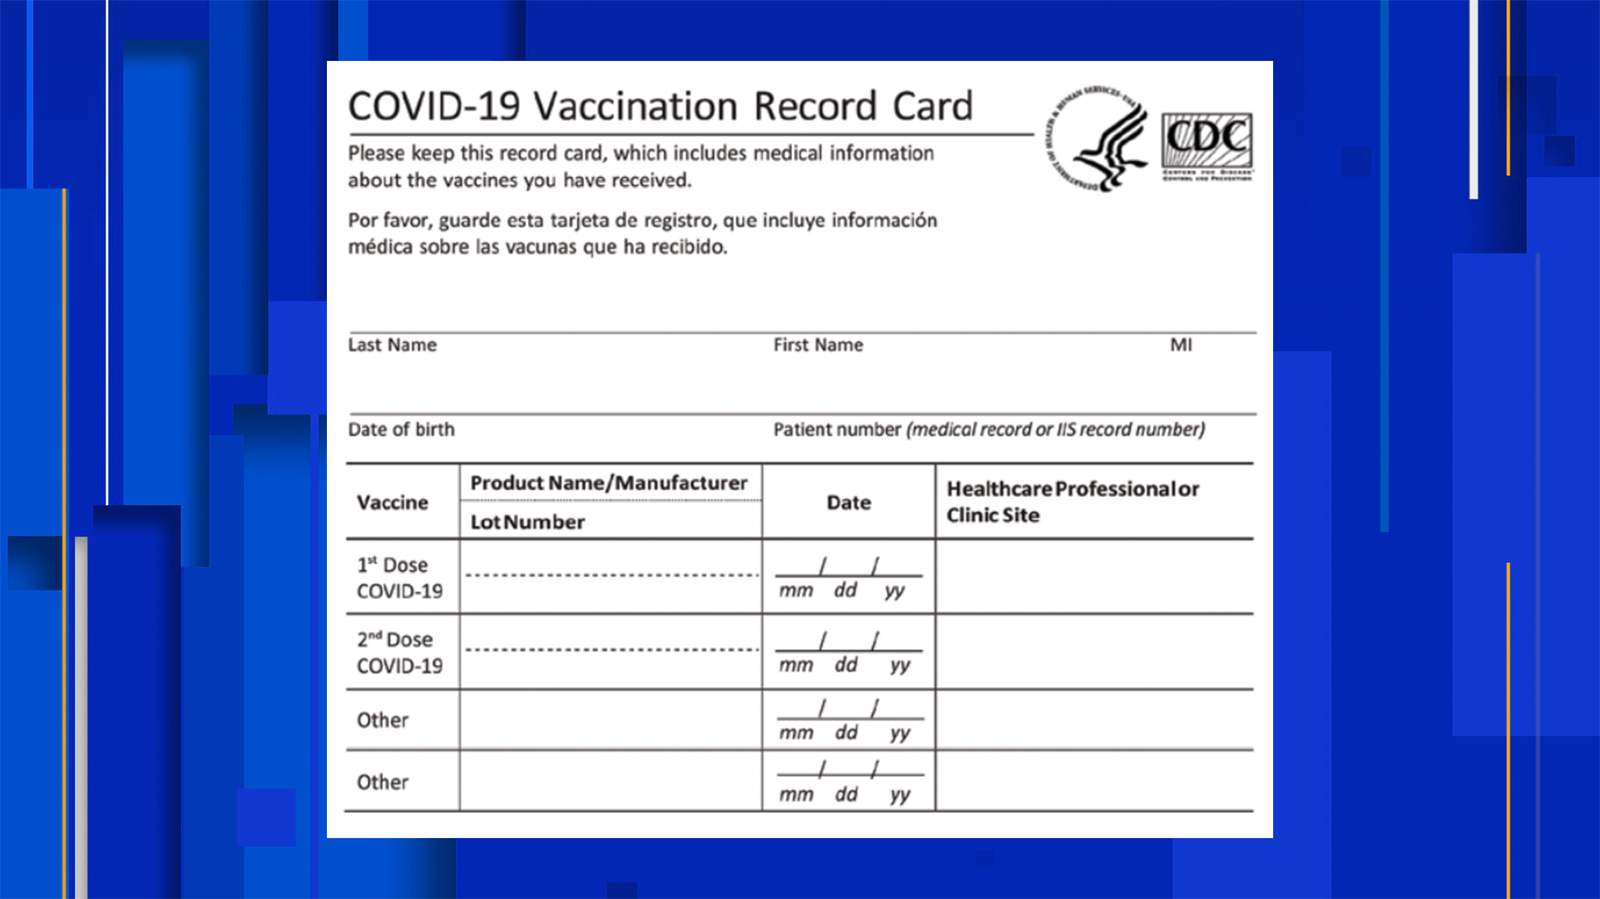 Get your completed COVID-19 vaccine card laminated for free at Office Depot through July